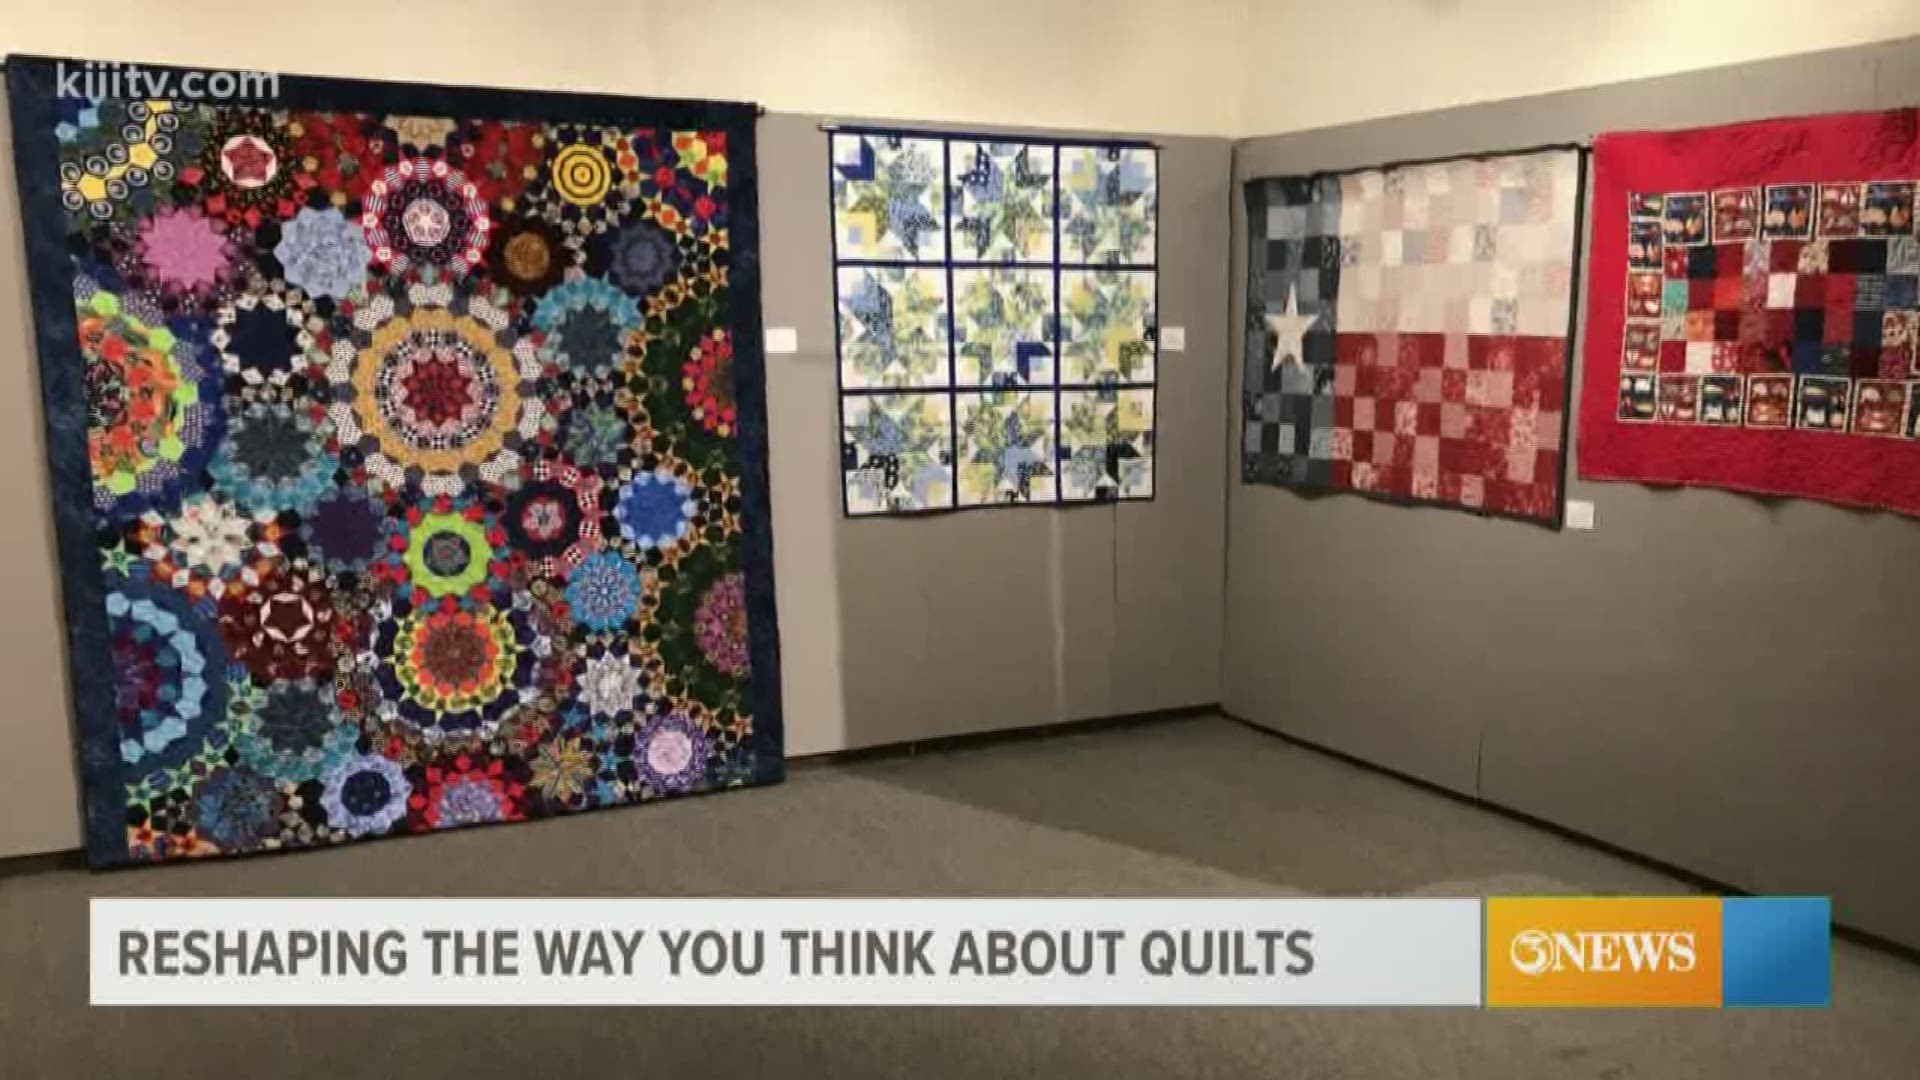 The quilt has long been a canvas on which anyone can express themselves, their culture or a cause, simply by knitting.